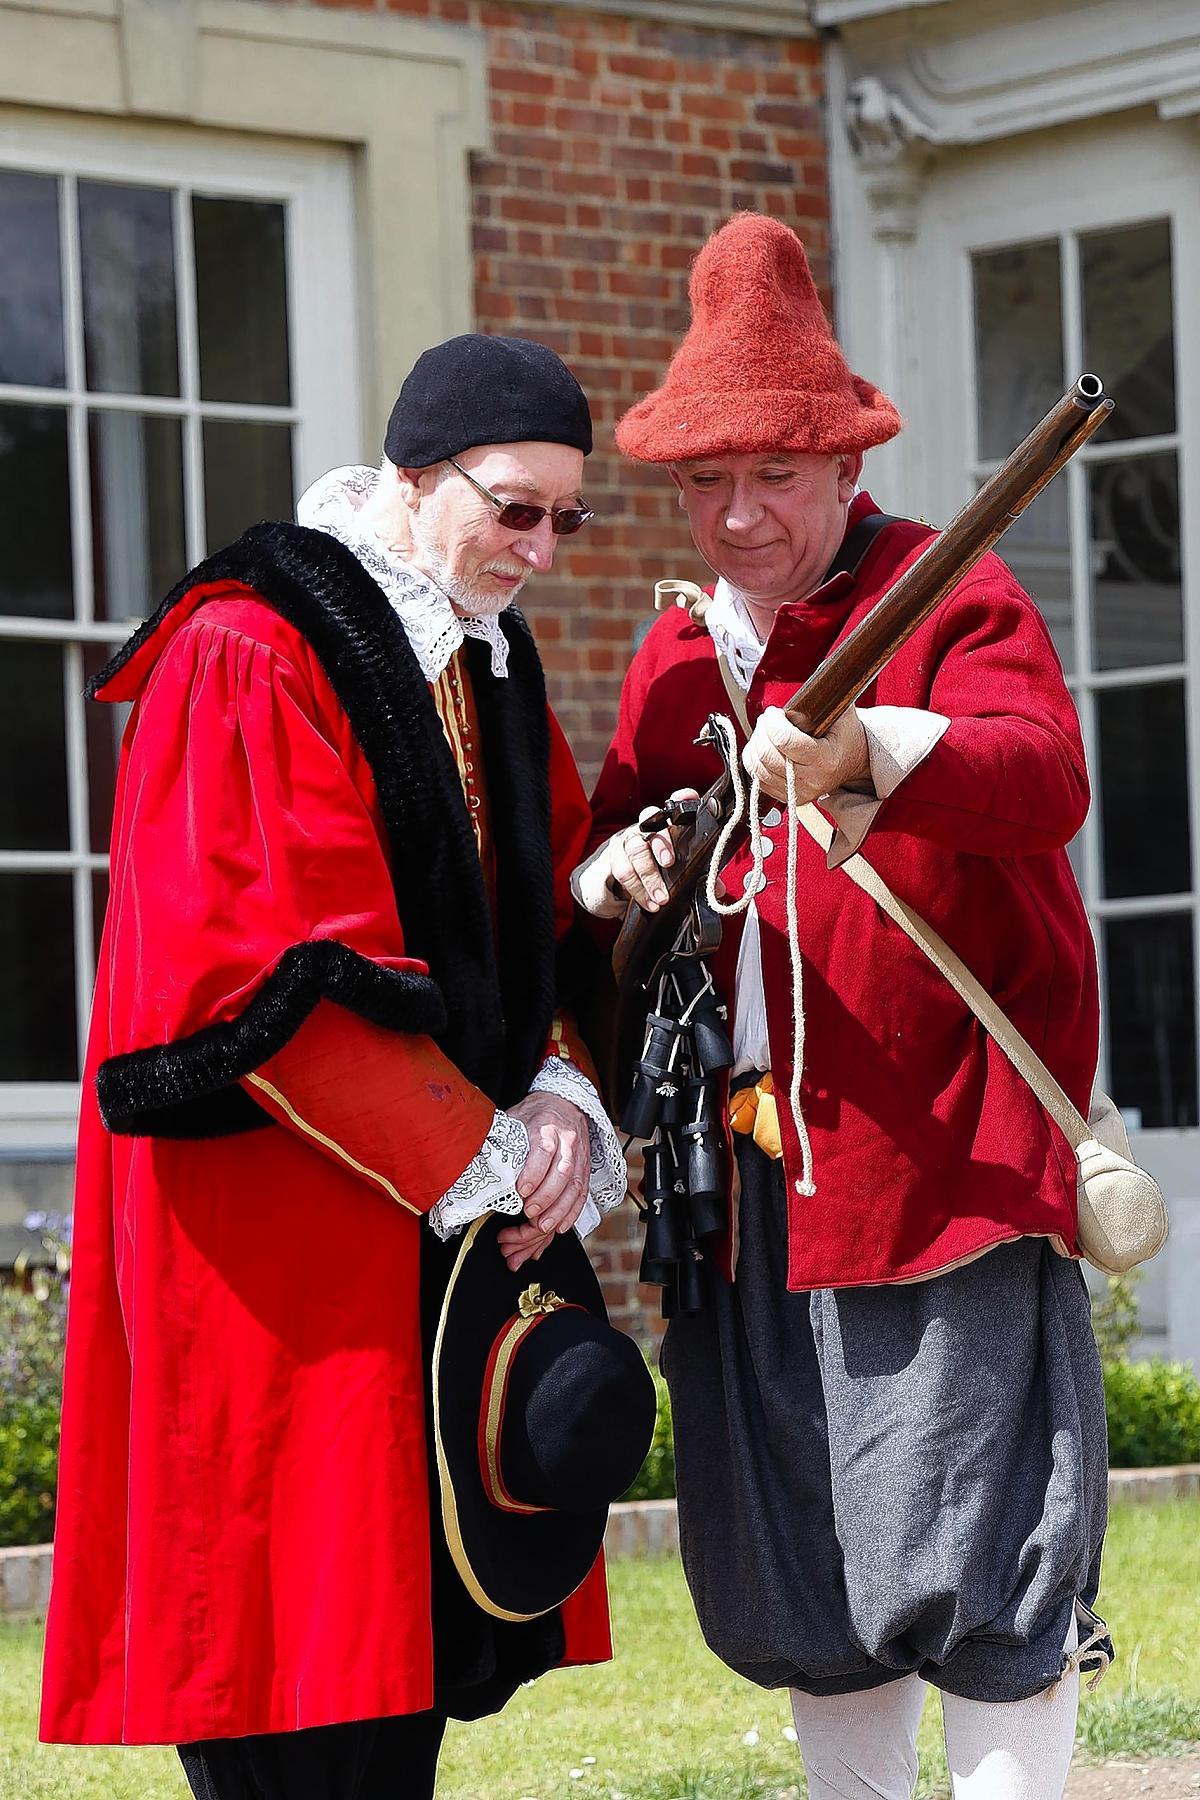 Forty Hall, in Forty Hill, Enfield, hosted a recreation of the 1643 battle between Roundheads and Cavaliers during the English Civil War.